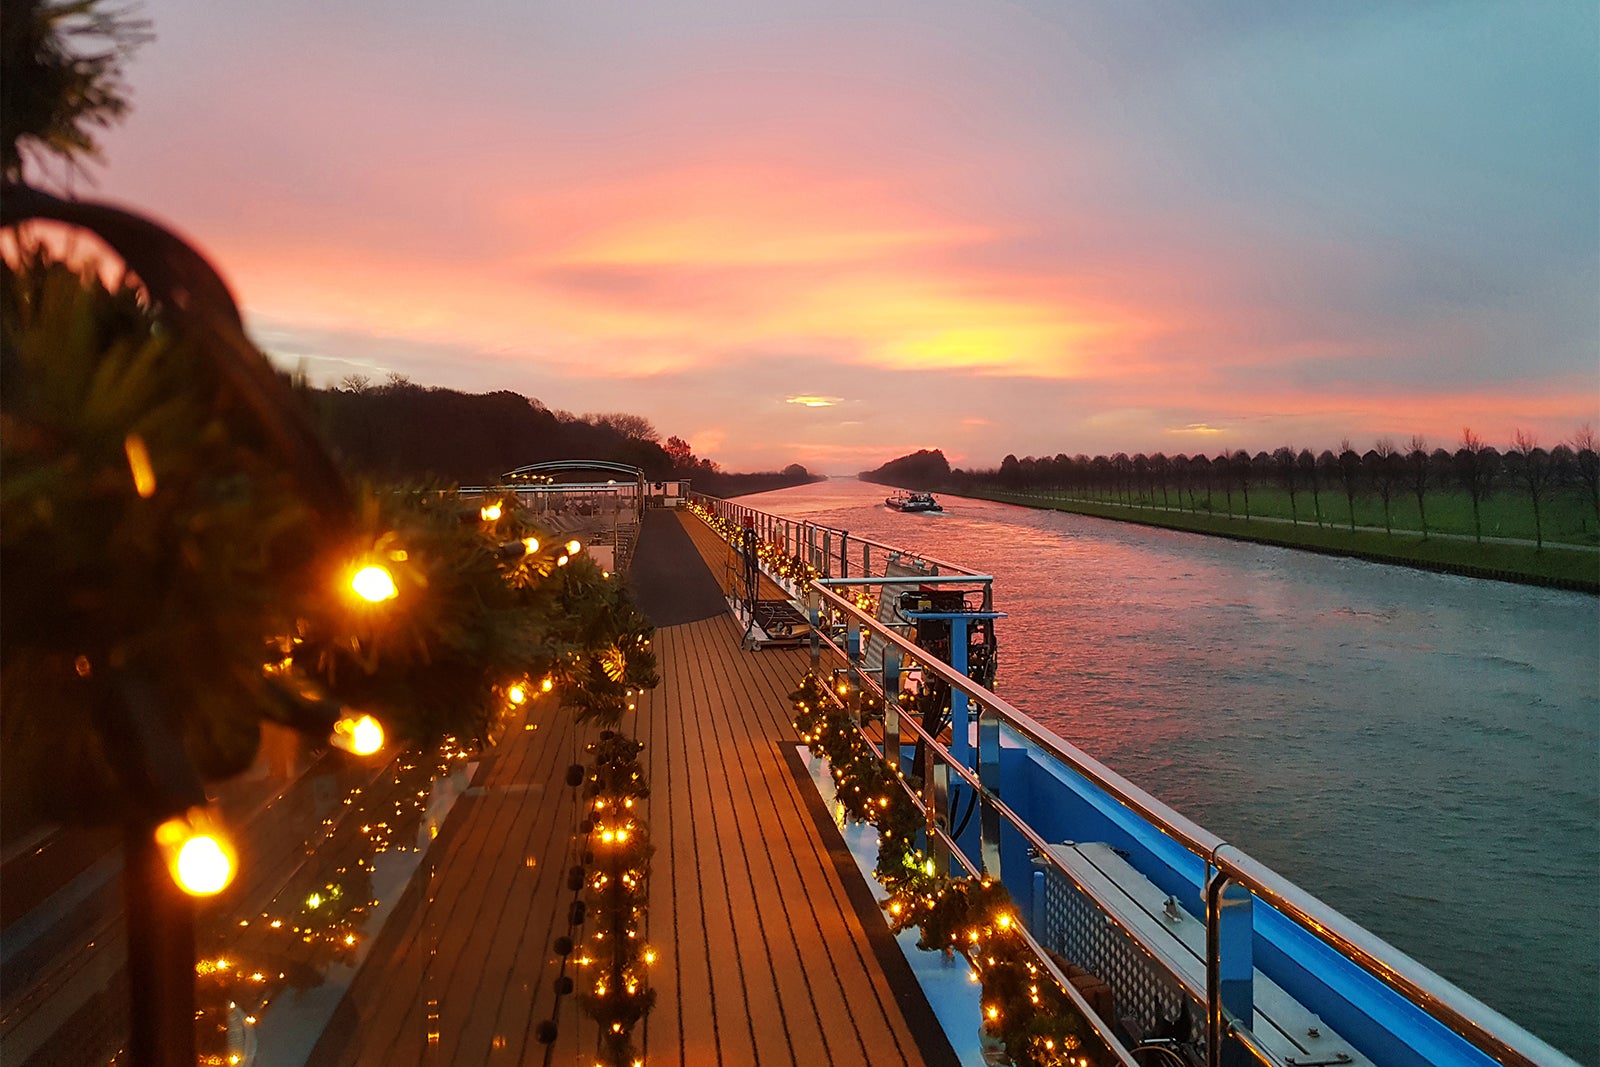 Christmas market river cruises: What to anticipate on a vacation crusing